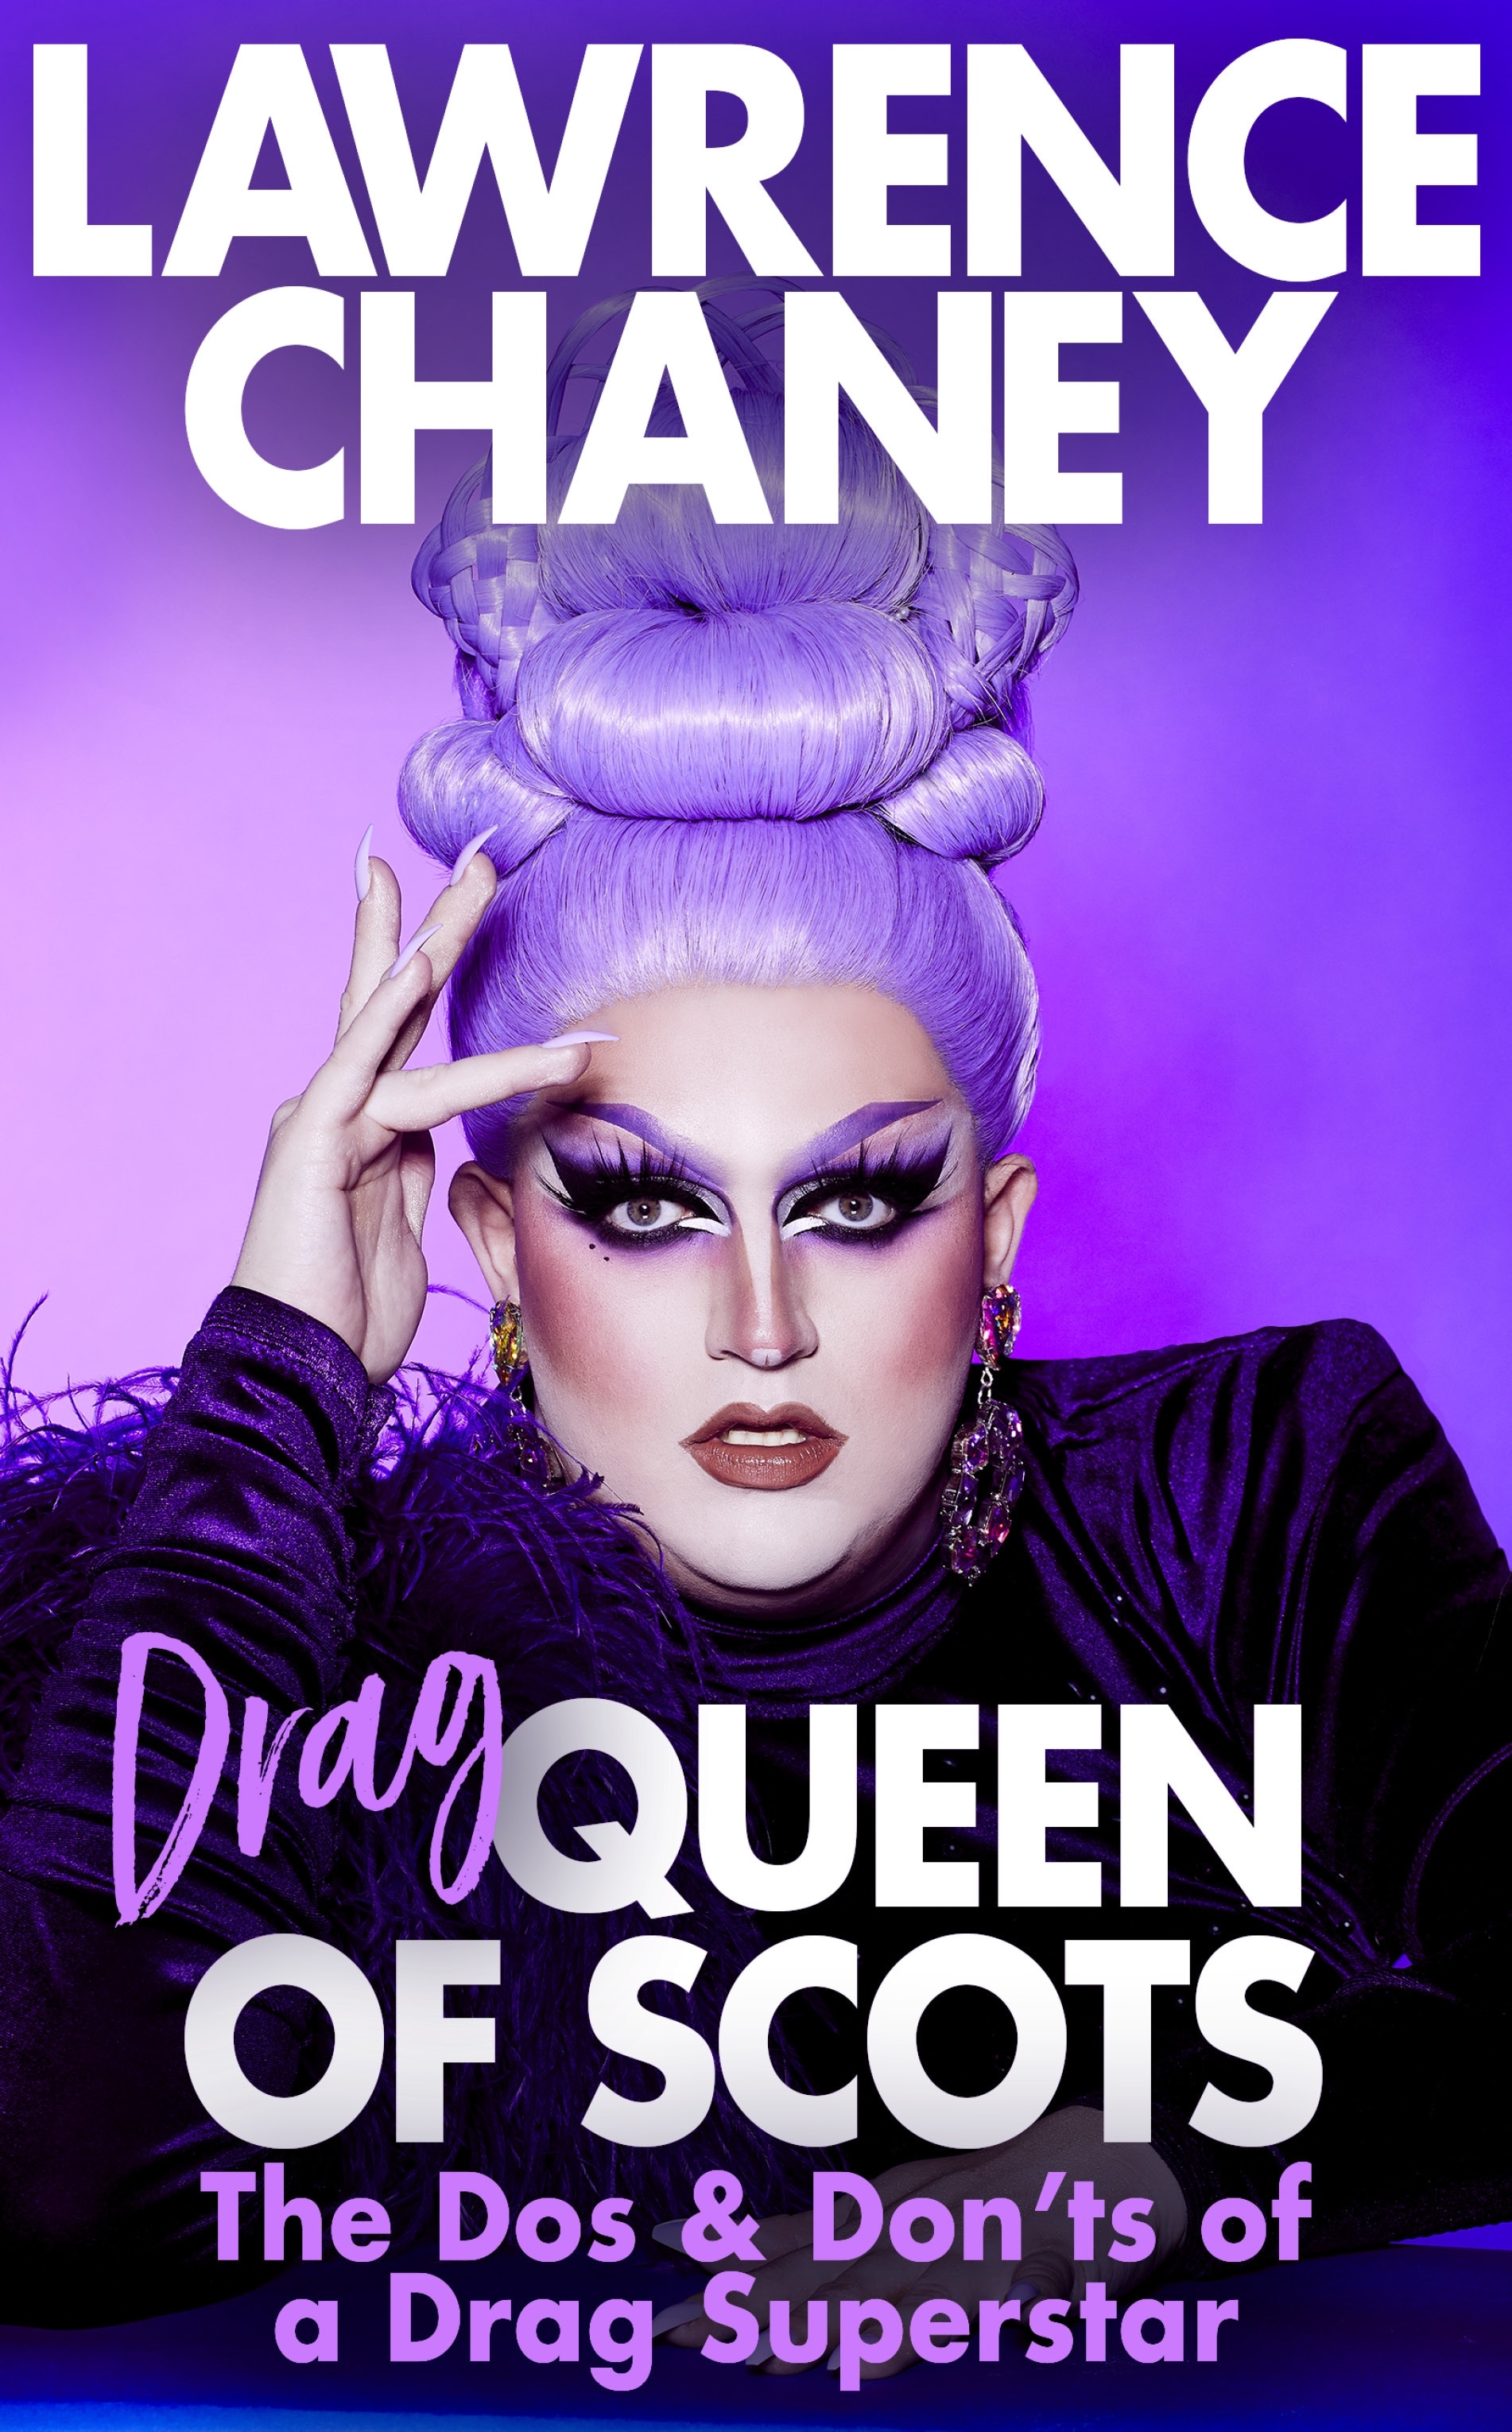 Book “(Drag) Queen of Scots” by Lawrence Chaney — September 23, 2021